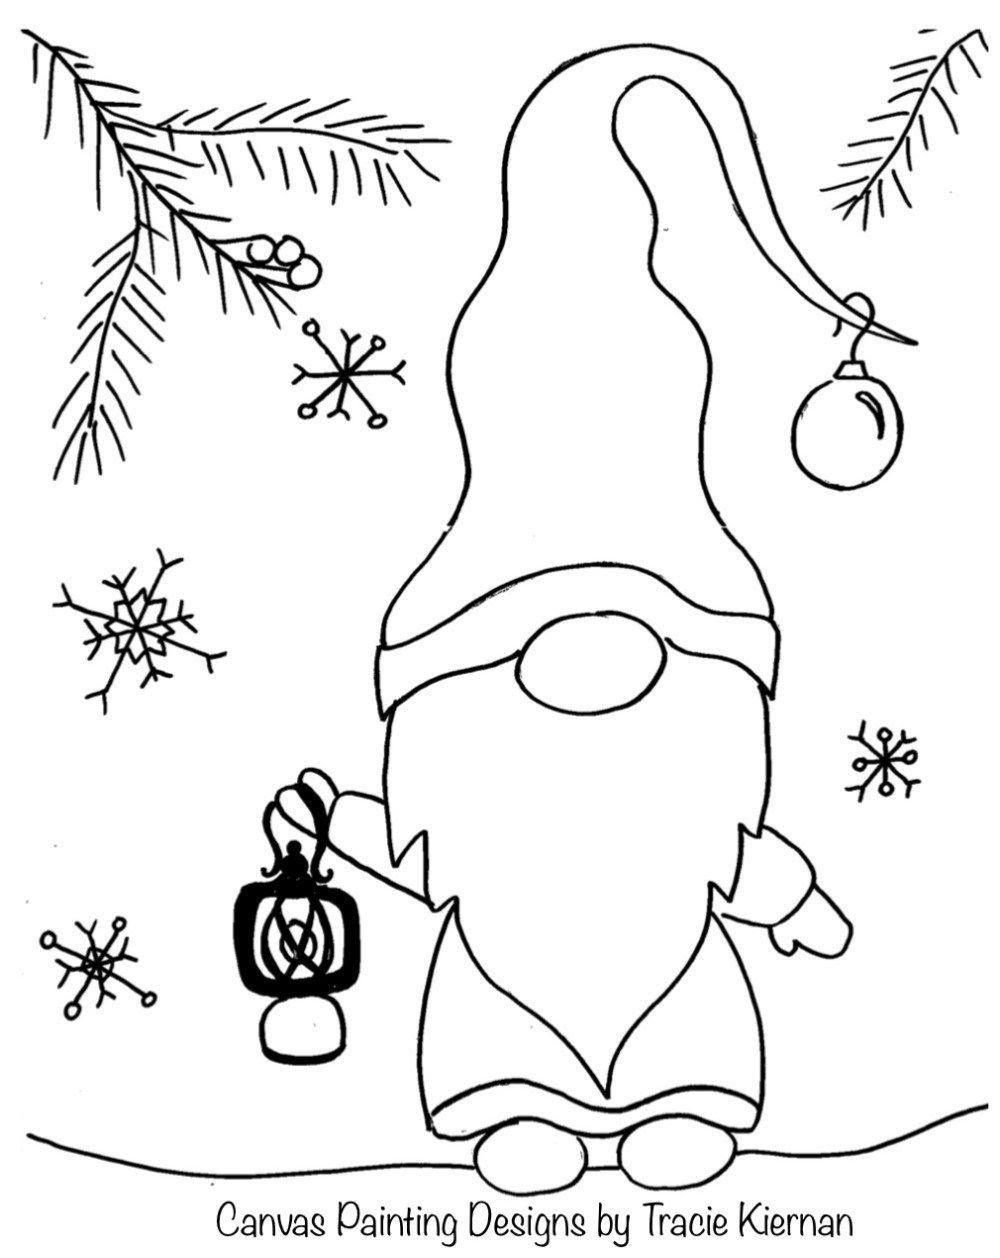 How To Paint A Winter Gnome Painting templates, Painting crafts